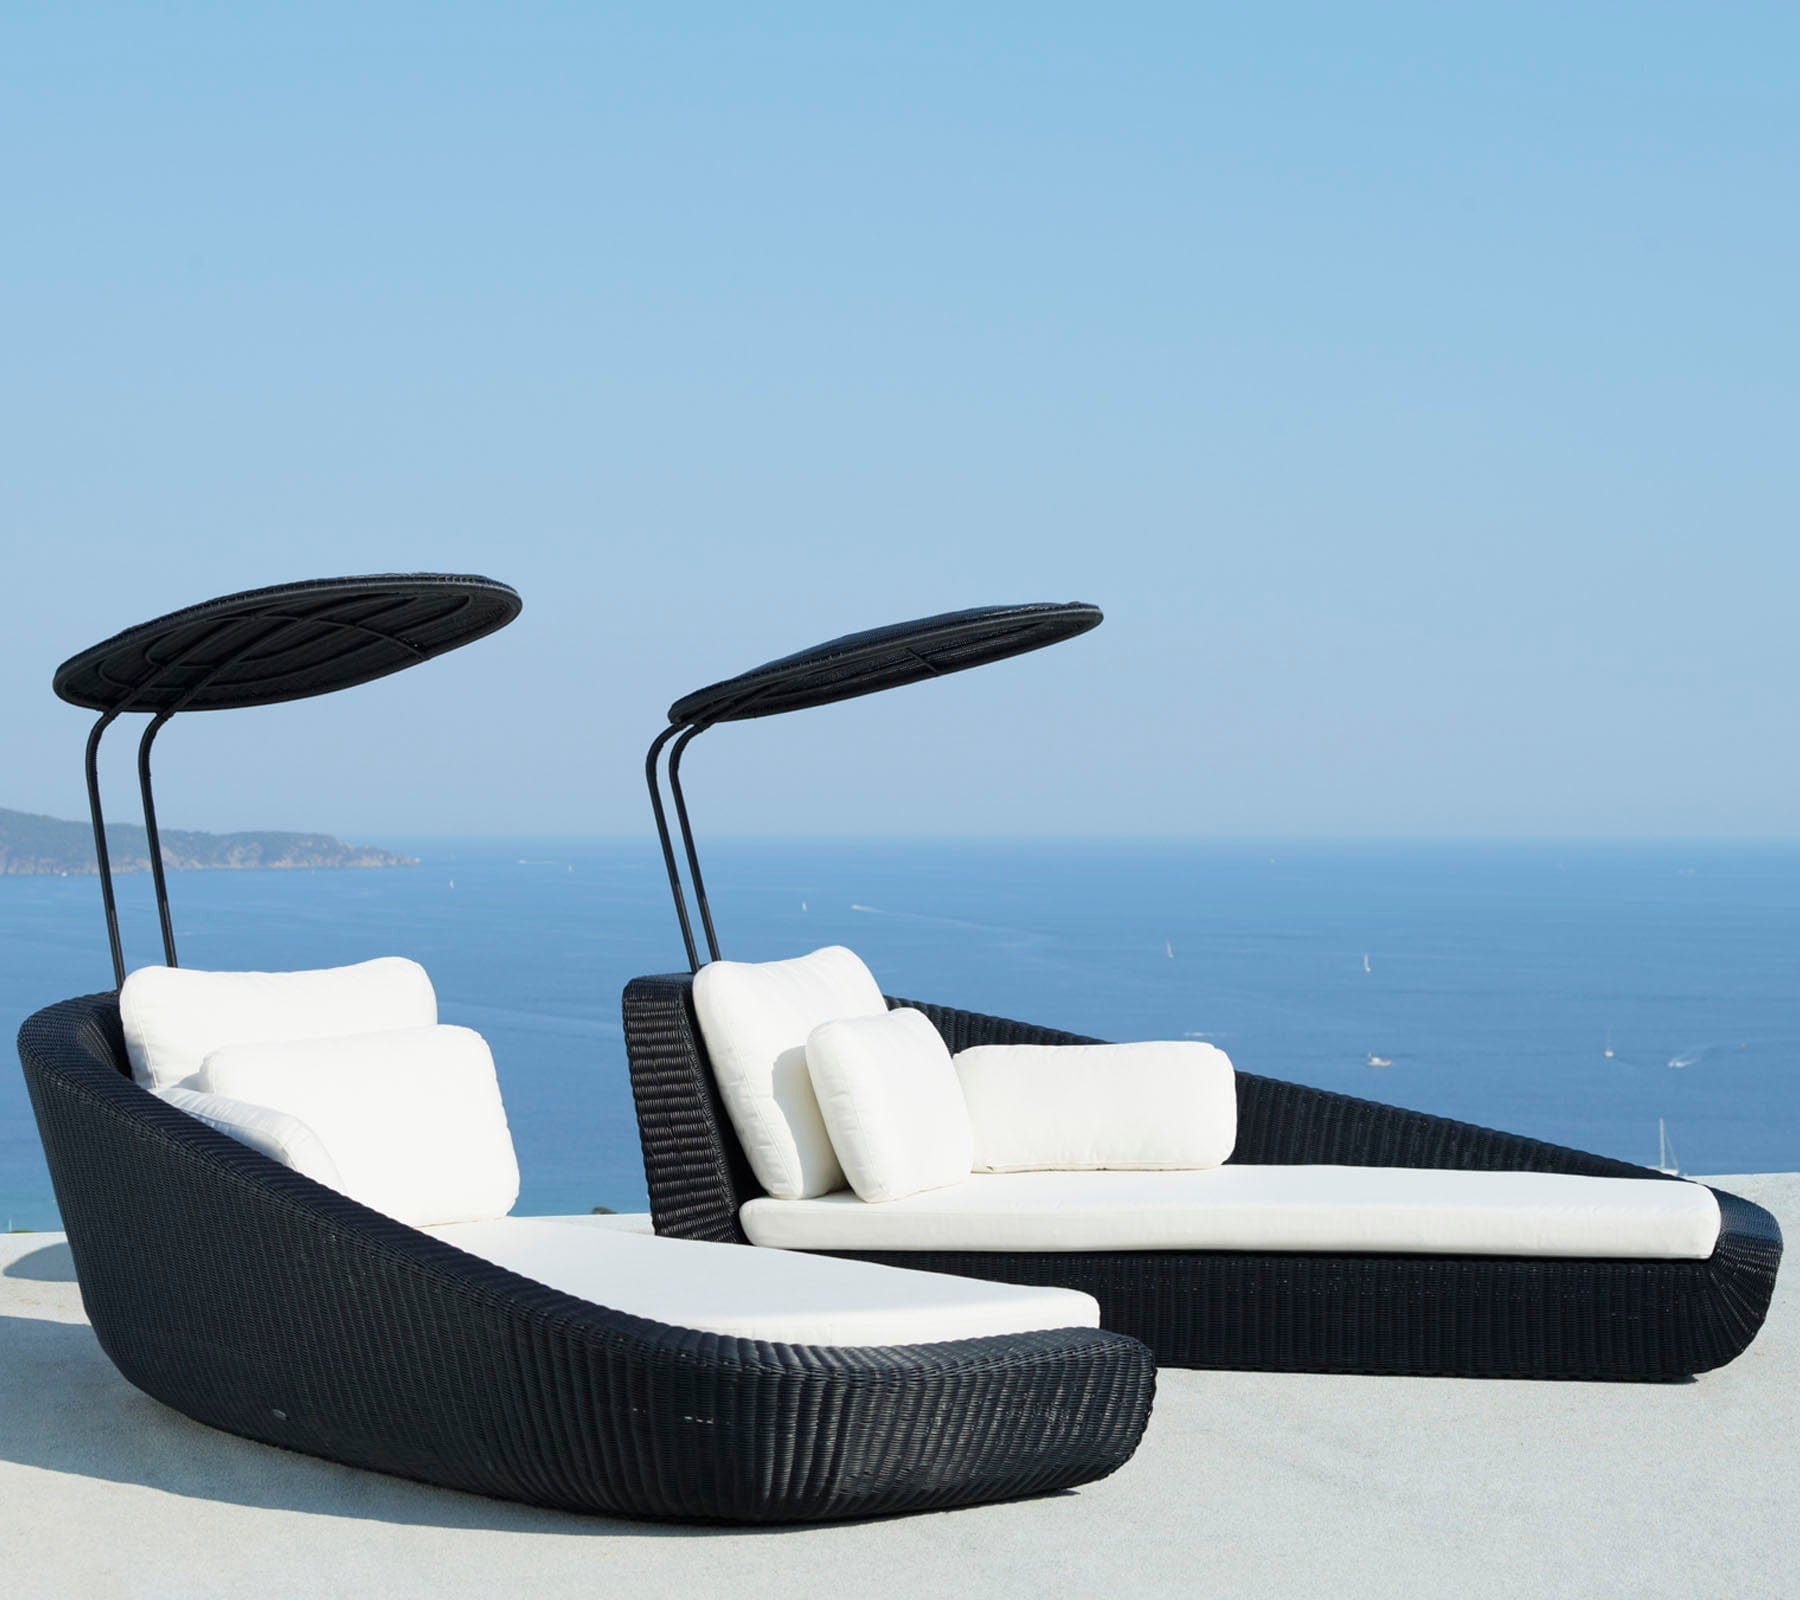 Boxhill's Savannah black outdoor  sectional chaise lounge with shade with white cushion and a sea view background